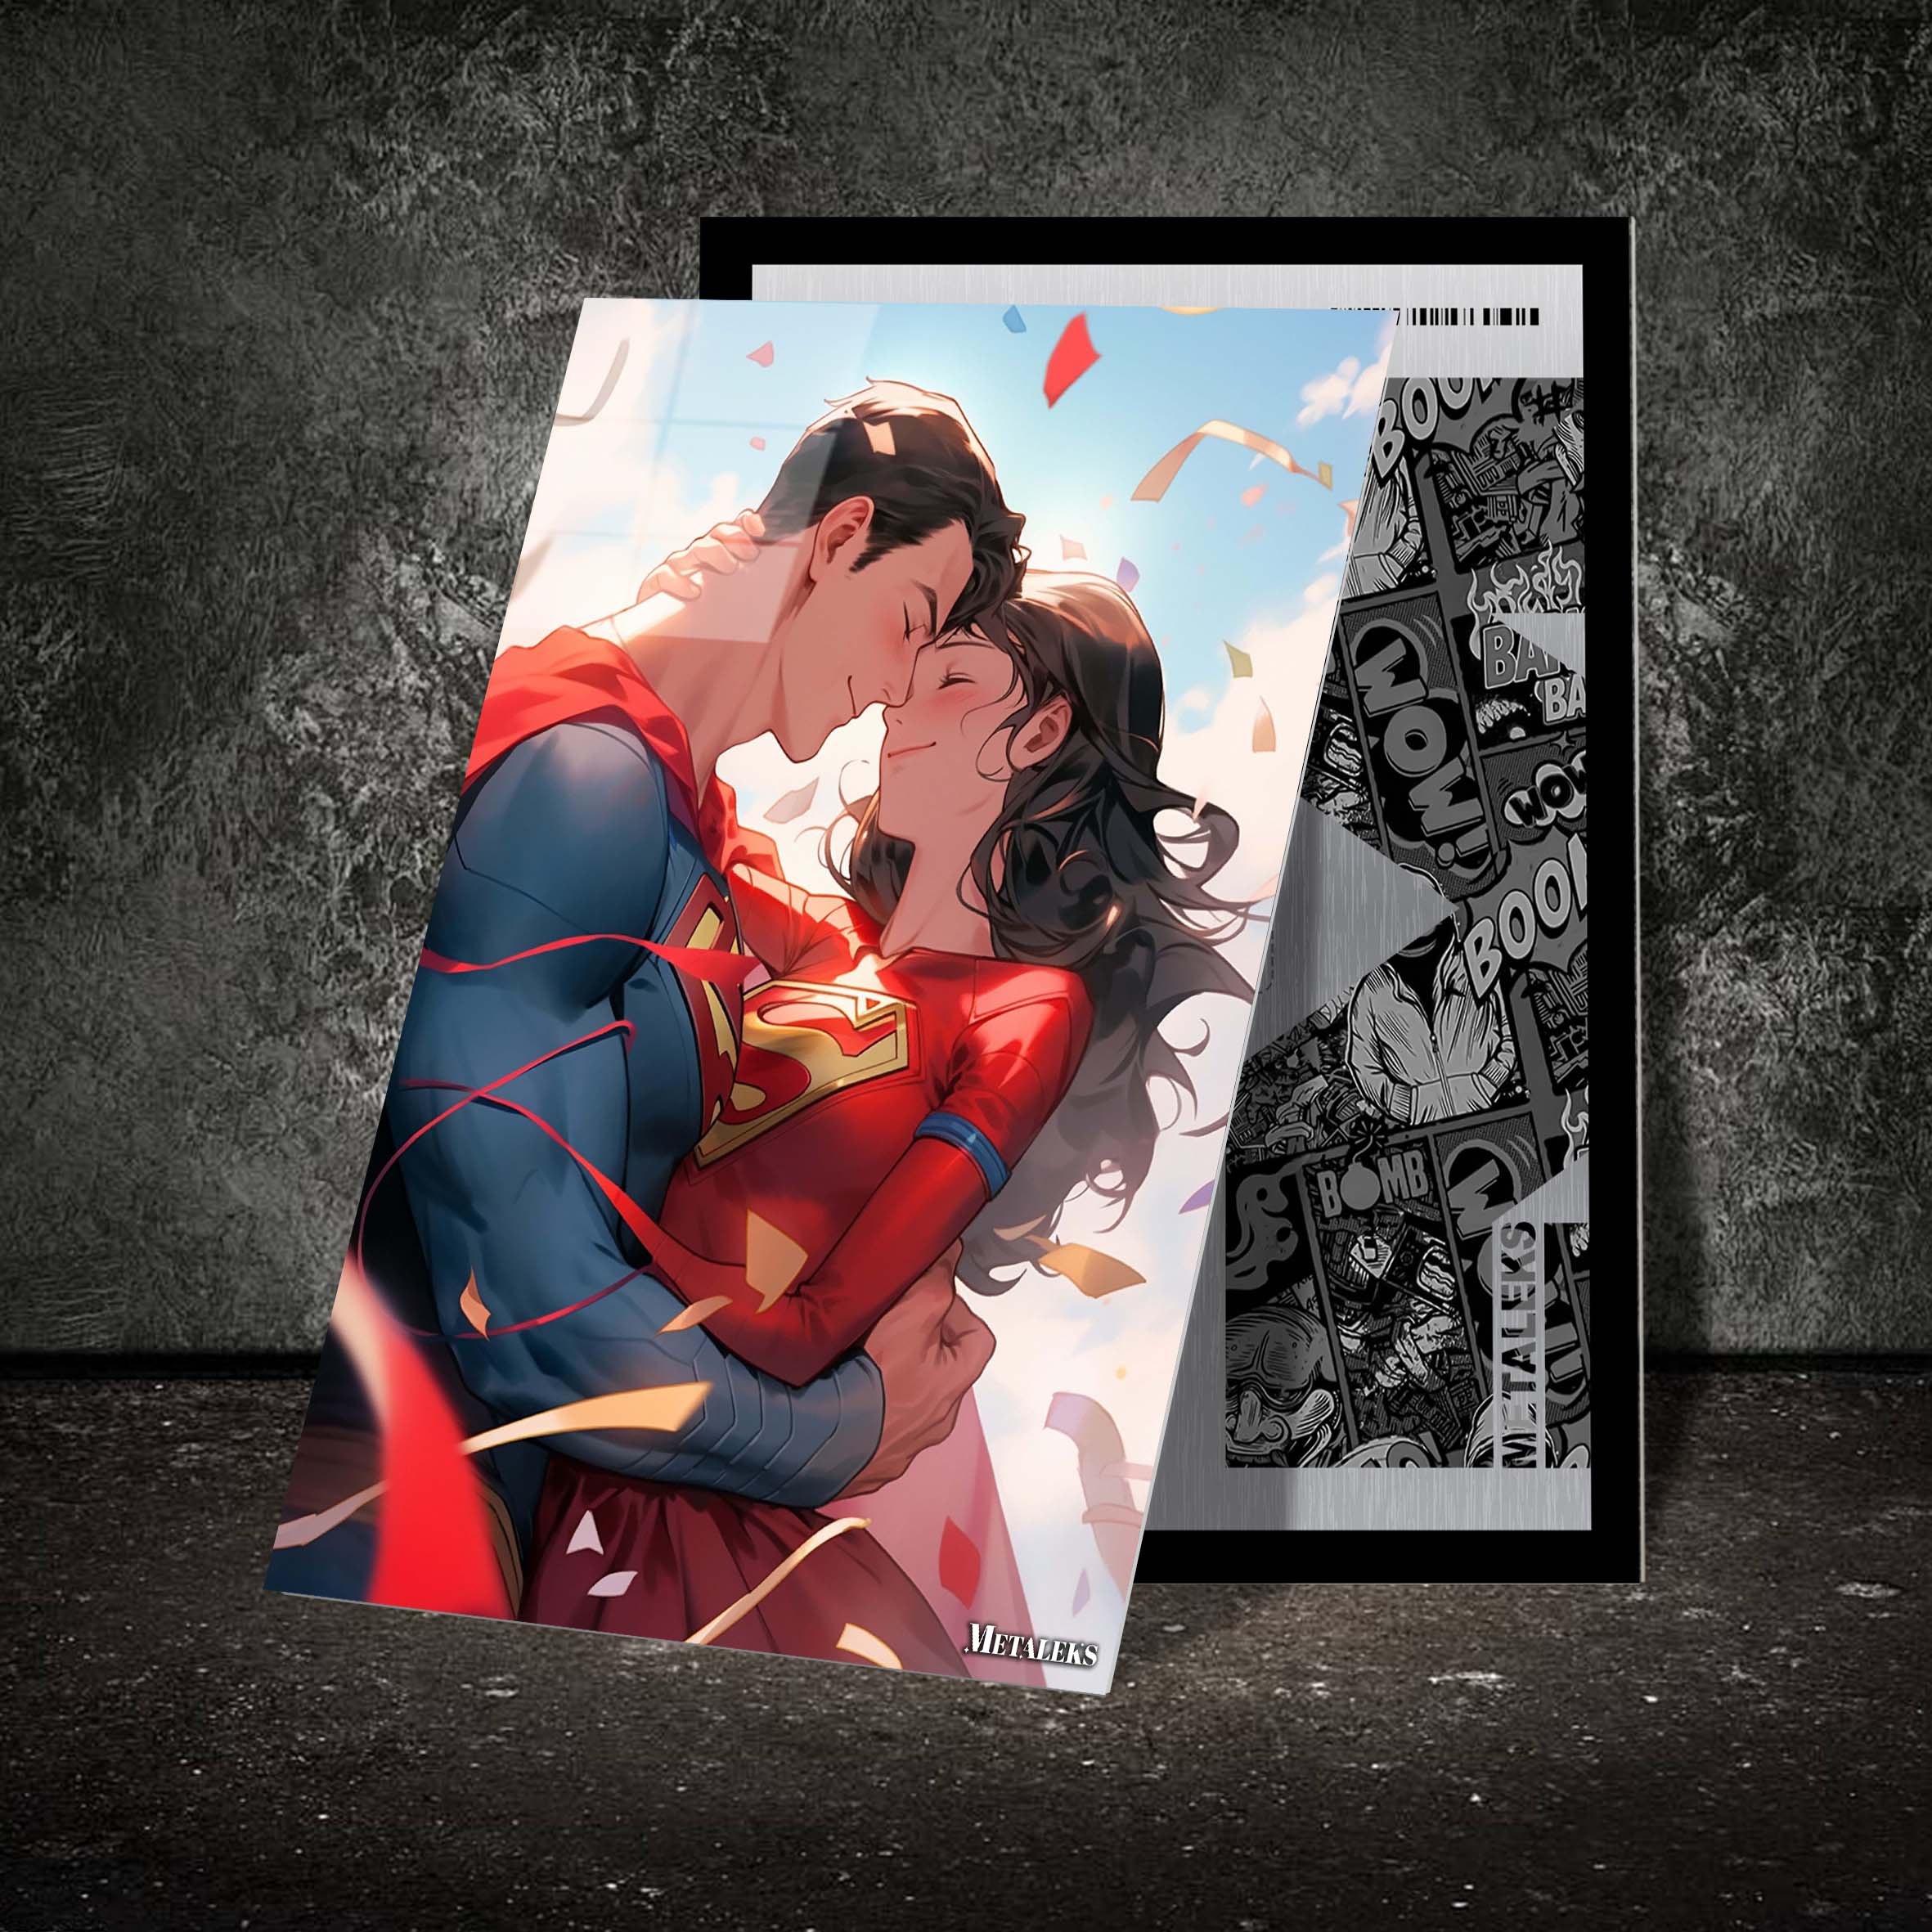 Flight of Legends_ Superman and Wonder Woman's Joint Adventures-designed by @theanimecrossover